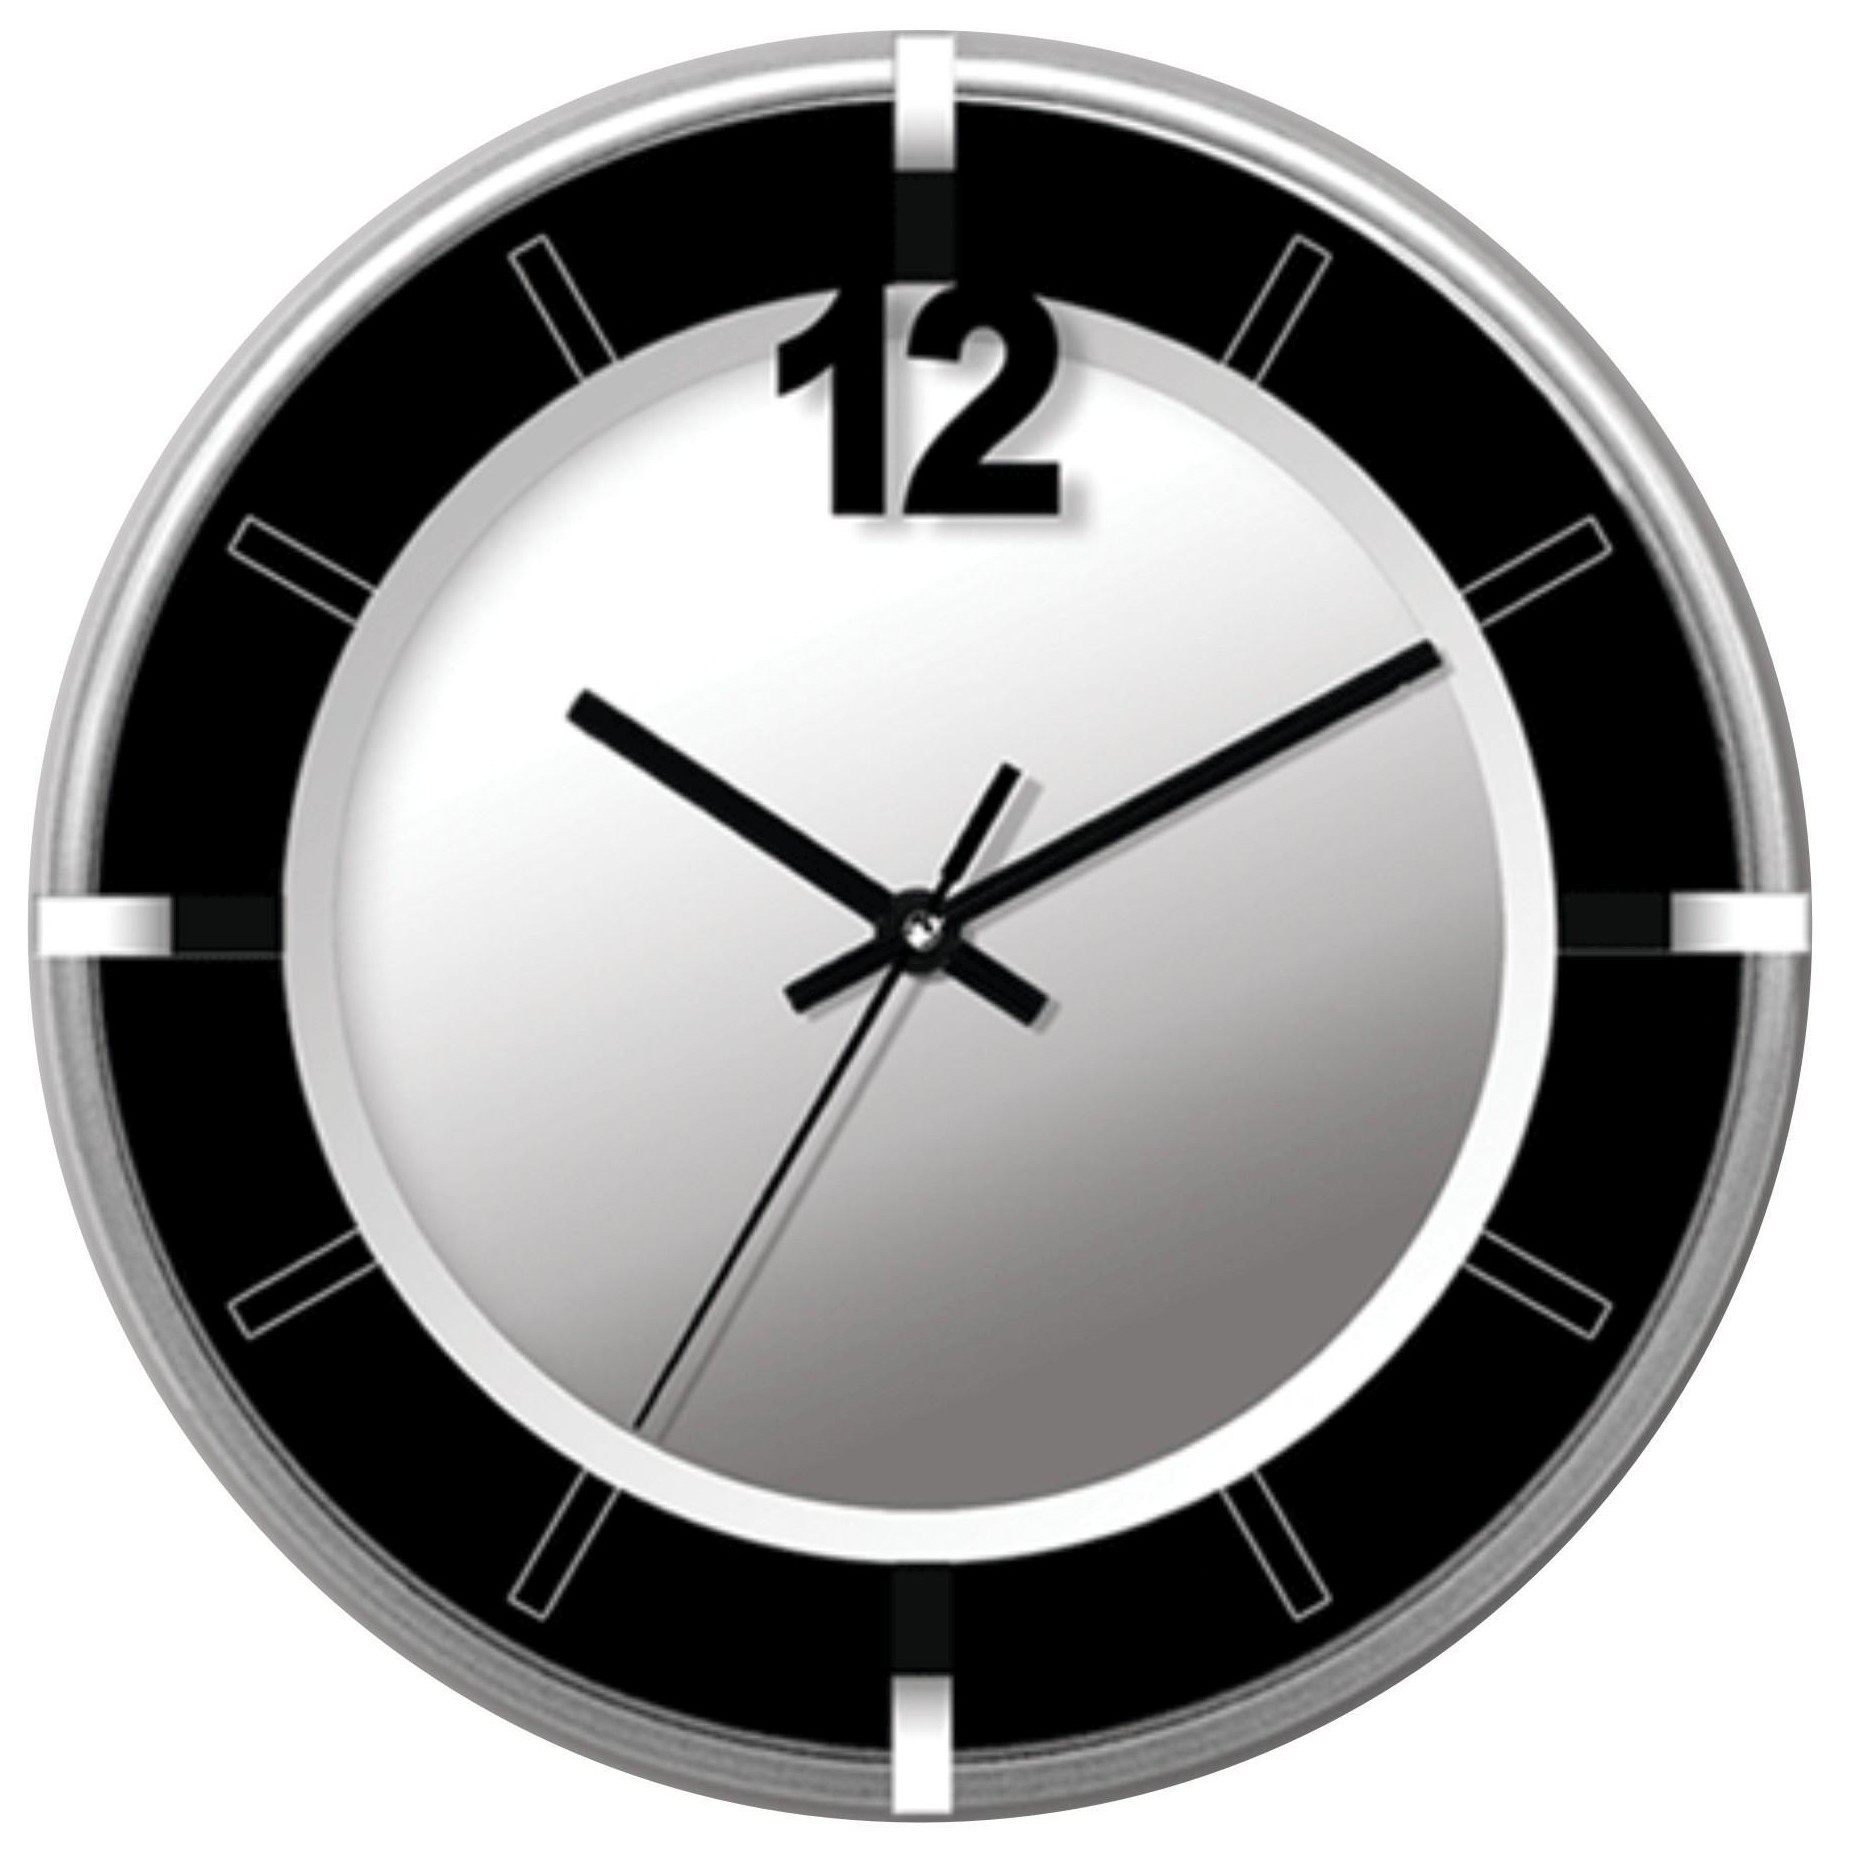 New wall clock in silver and black ebay